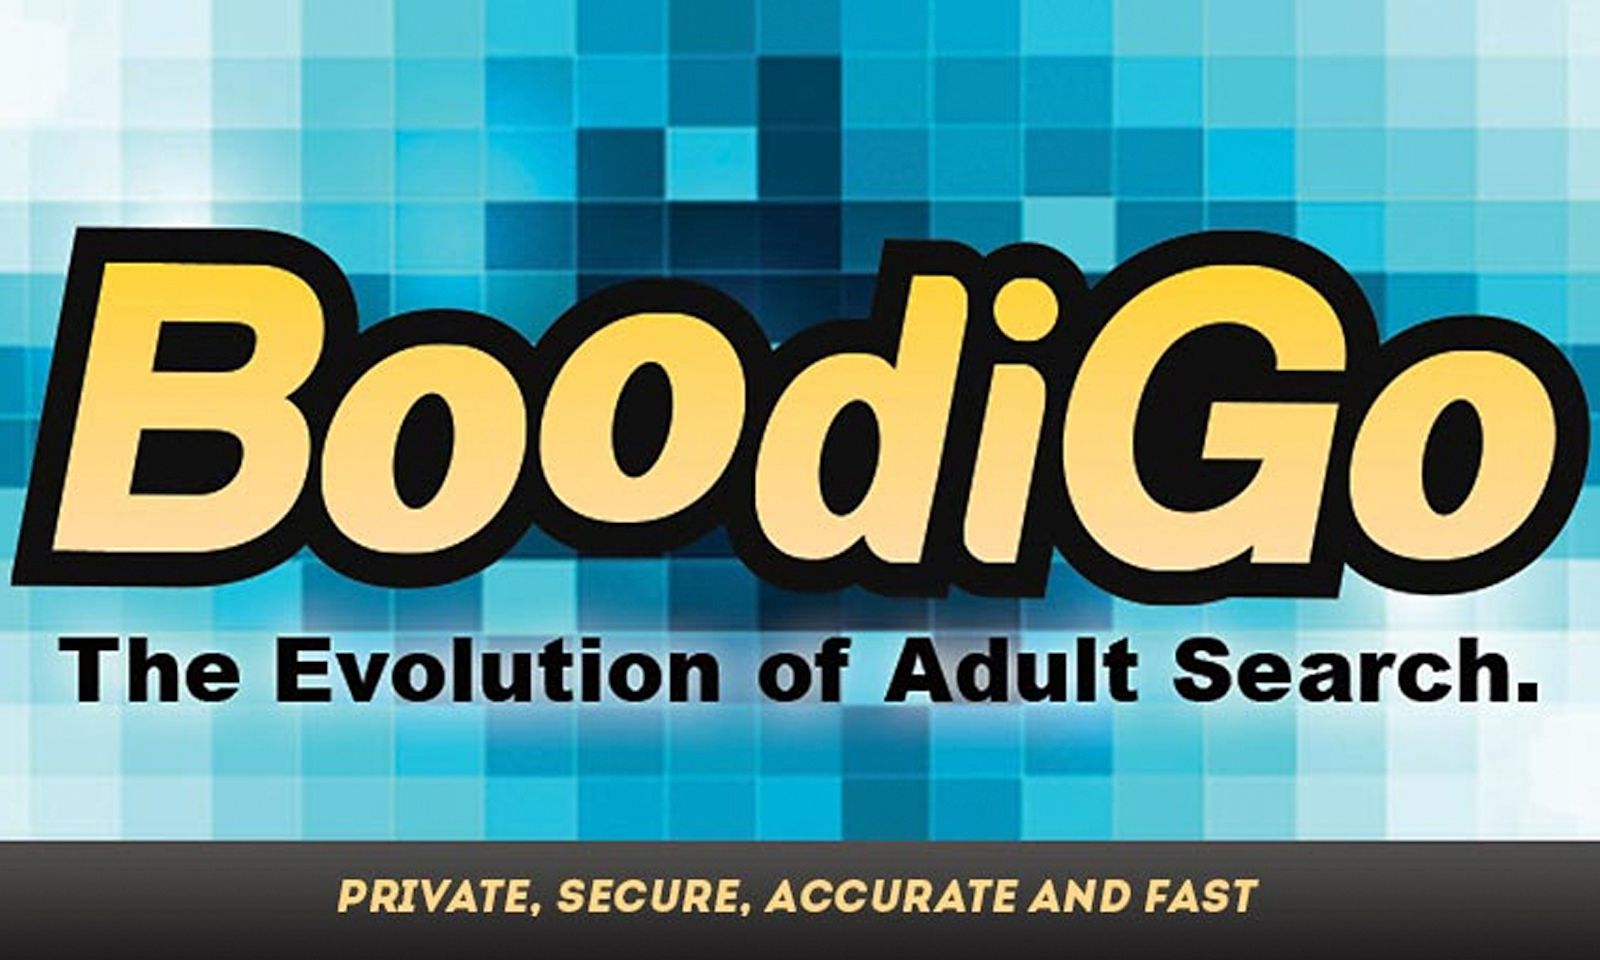 BoodiGo.com Getting Searches From Those With Privacy Concerns